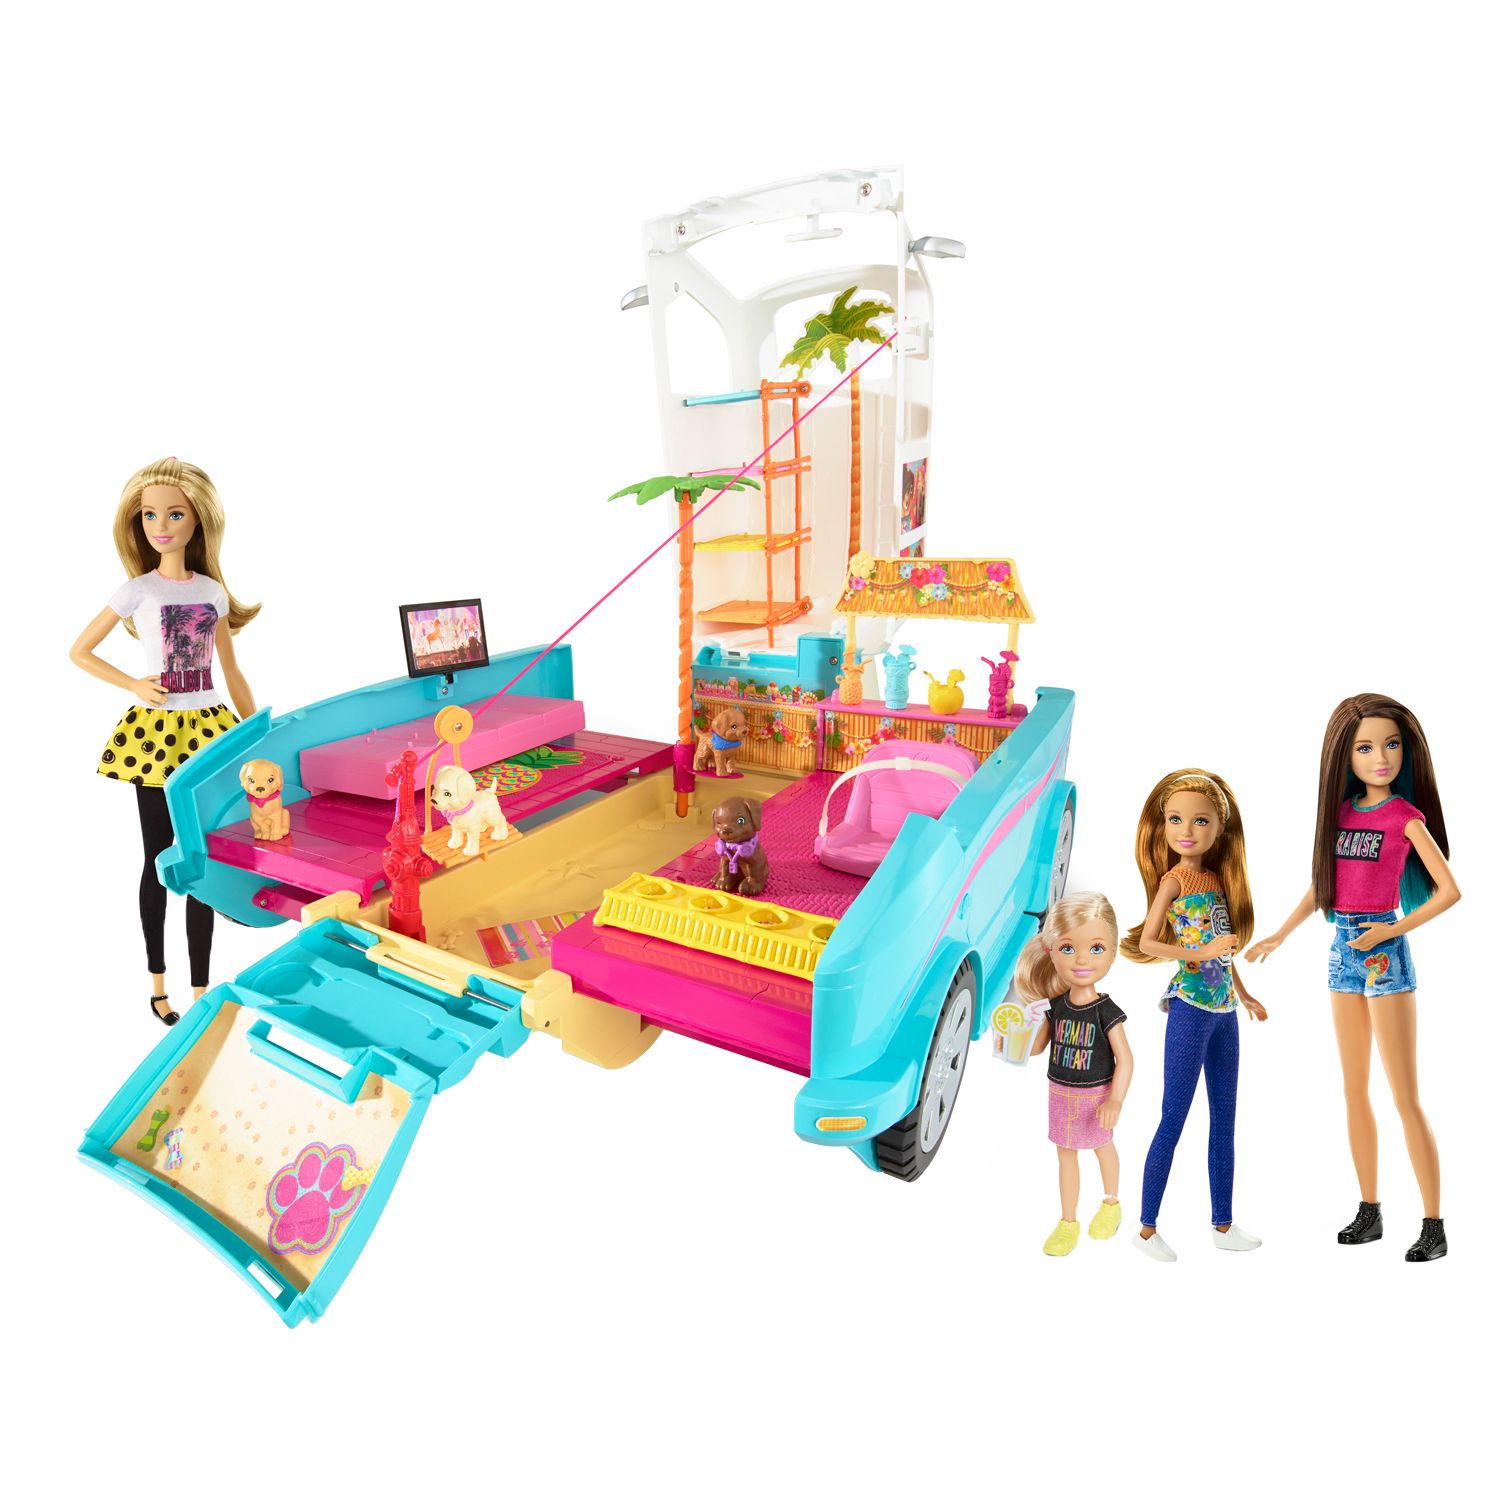 barbie ultimate puppy mobile vehicle